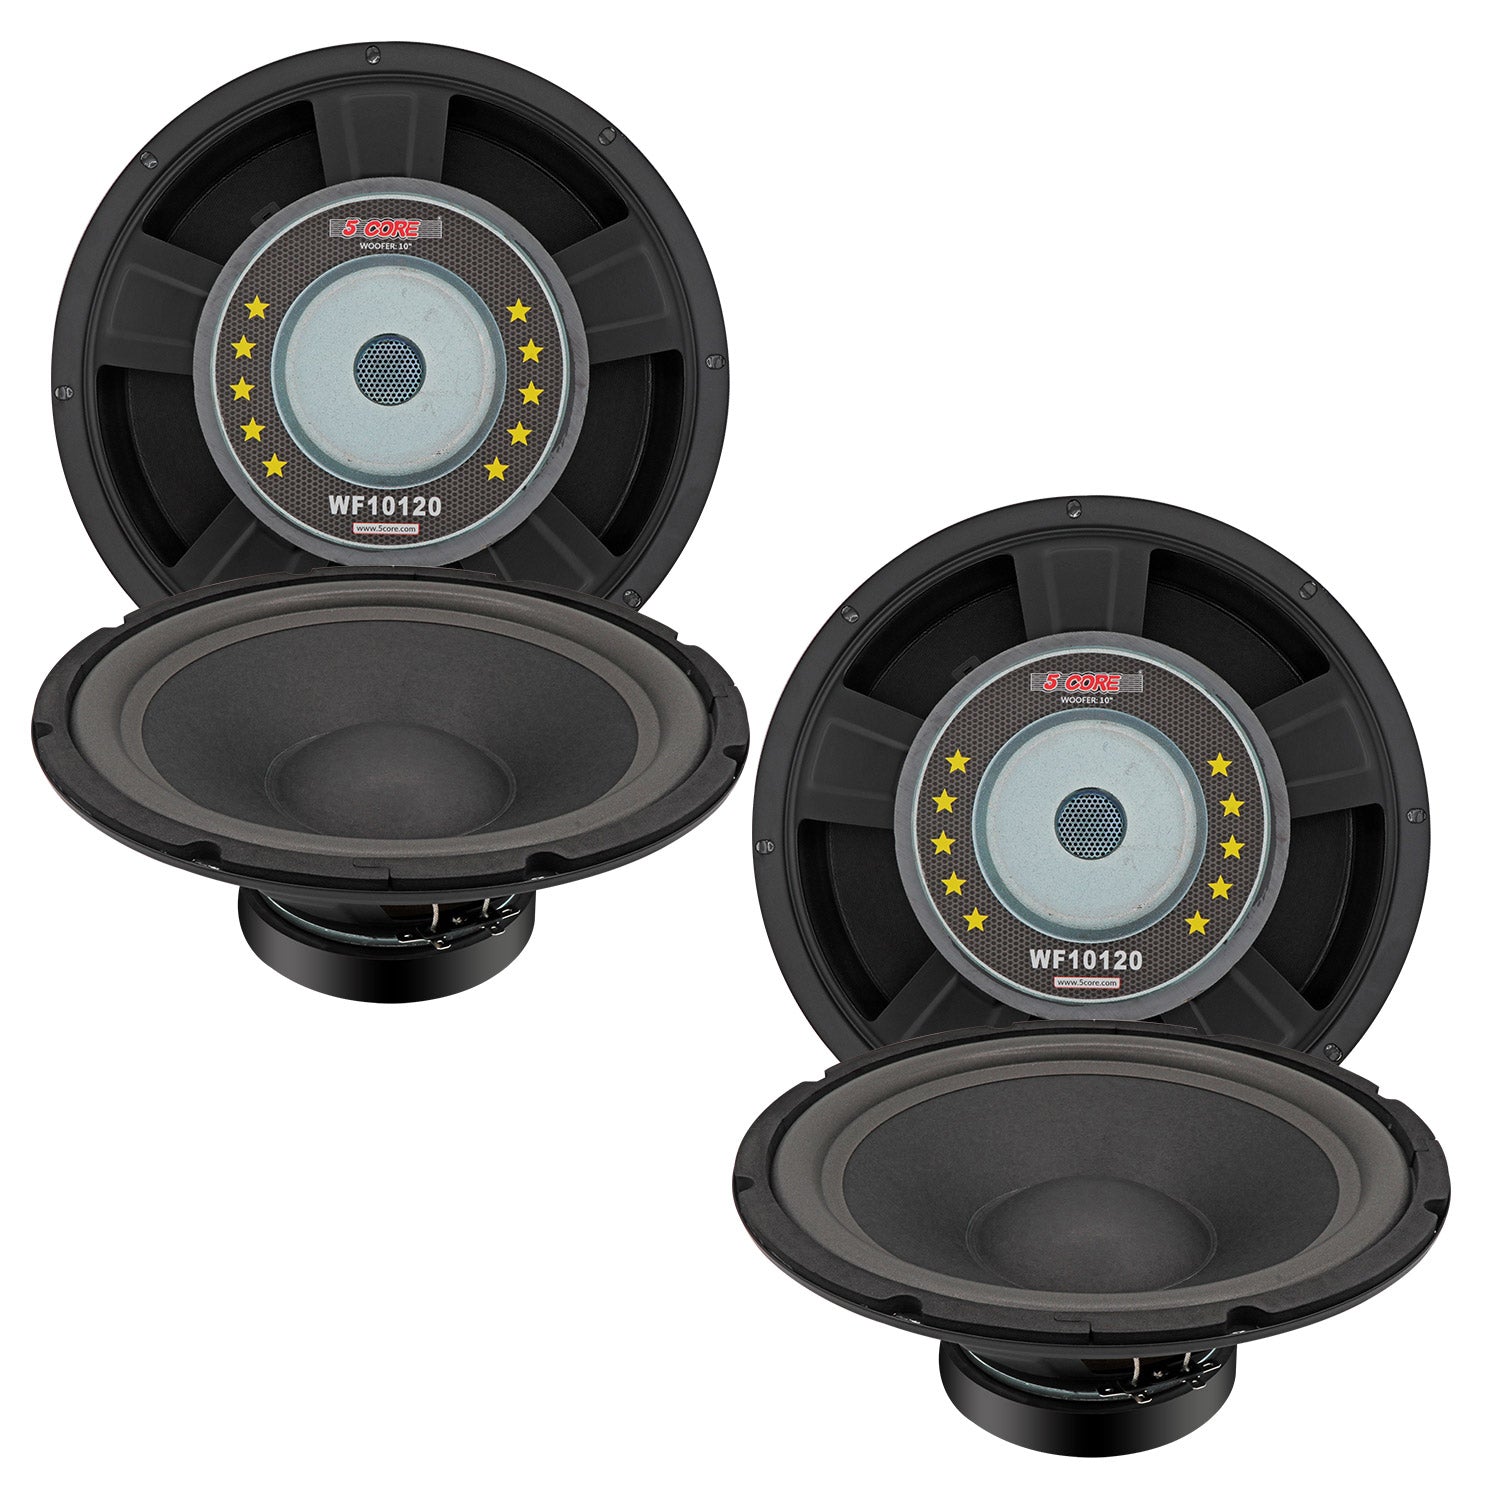 5 Core 10 Inch Subwoofer Speaker 750W Peak 4 Ohm Replacement Car Bass Sub Woofer w 23 Oz Magnet